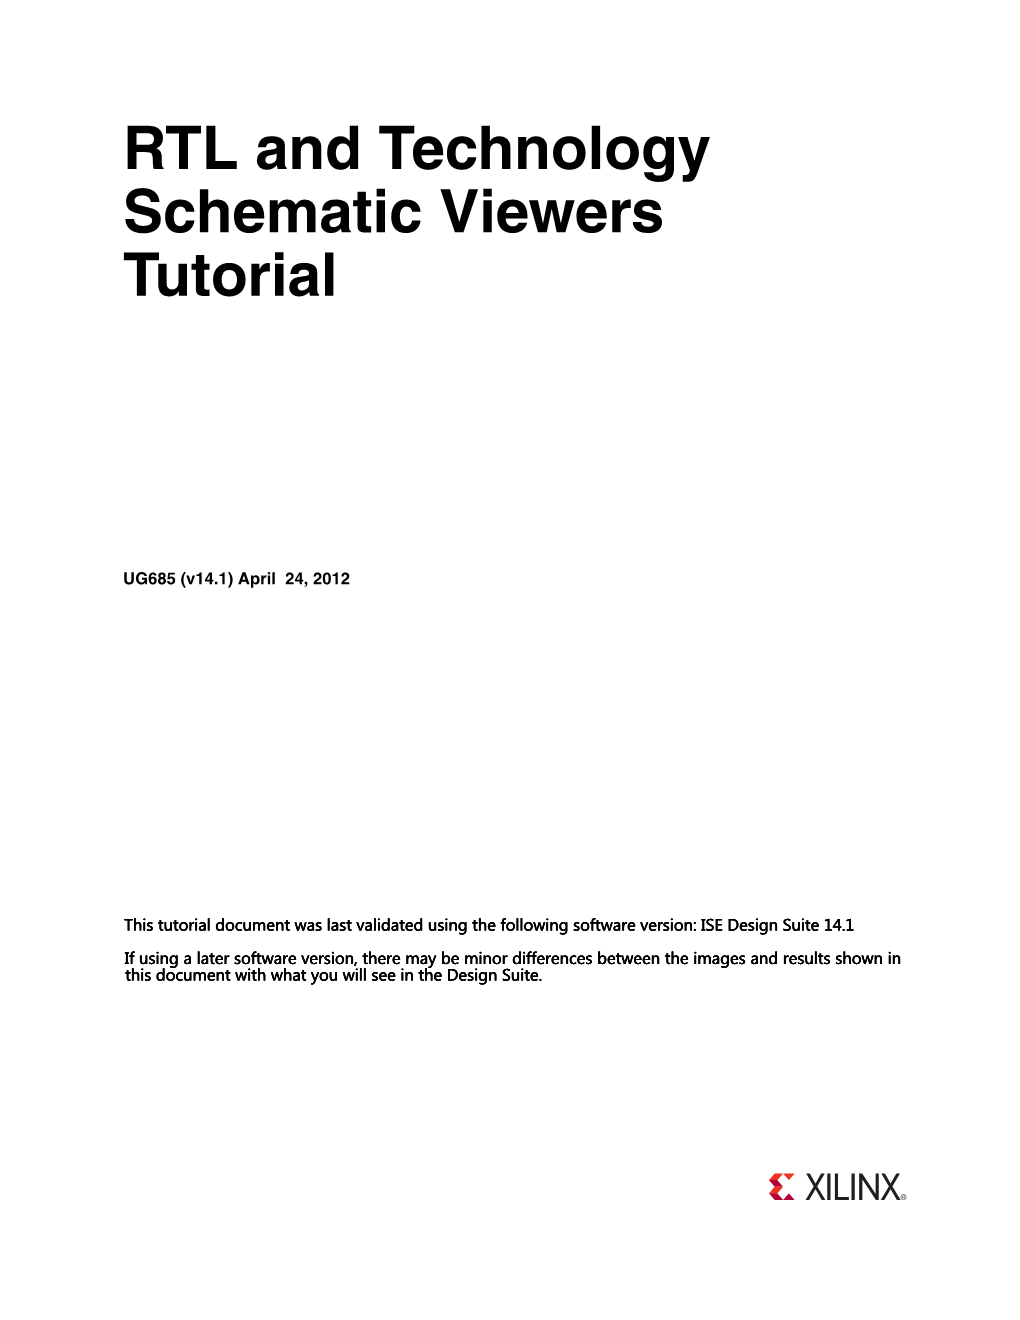 Xilinx RTL and Technology Schematic Viewers Tutorial (UG685)